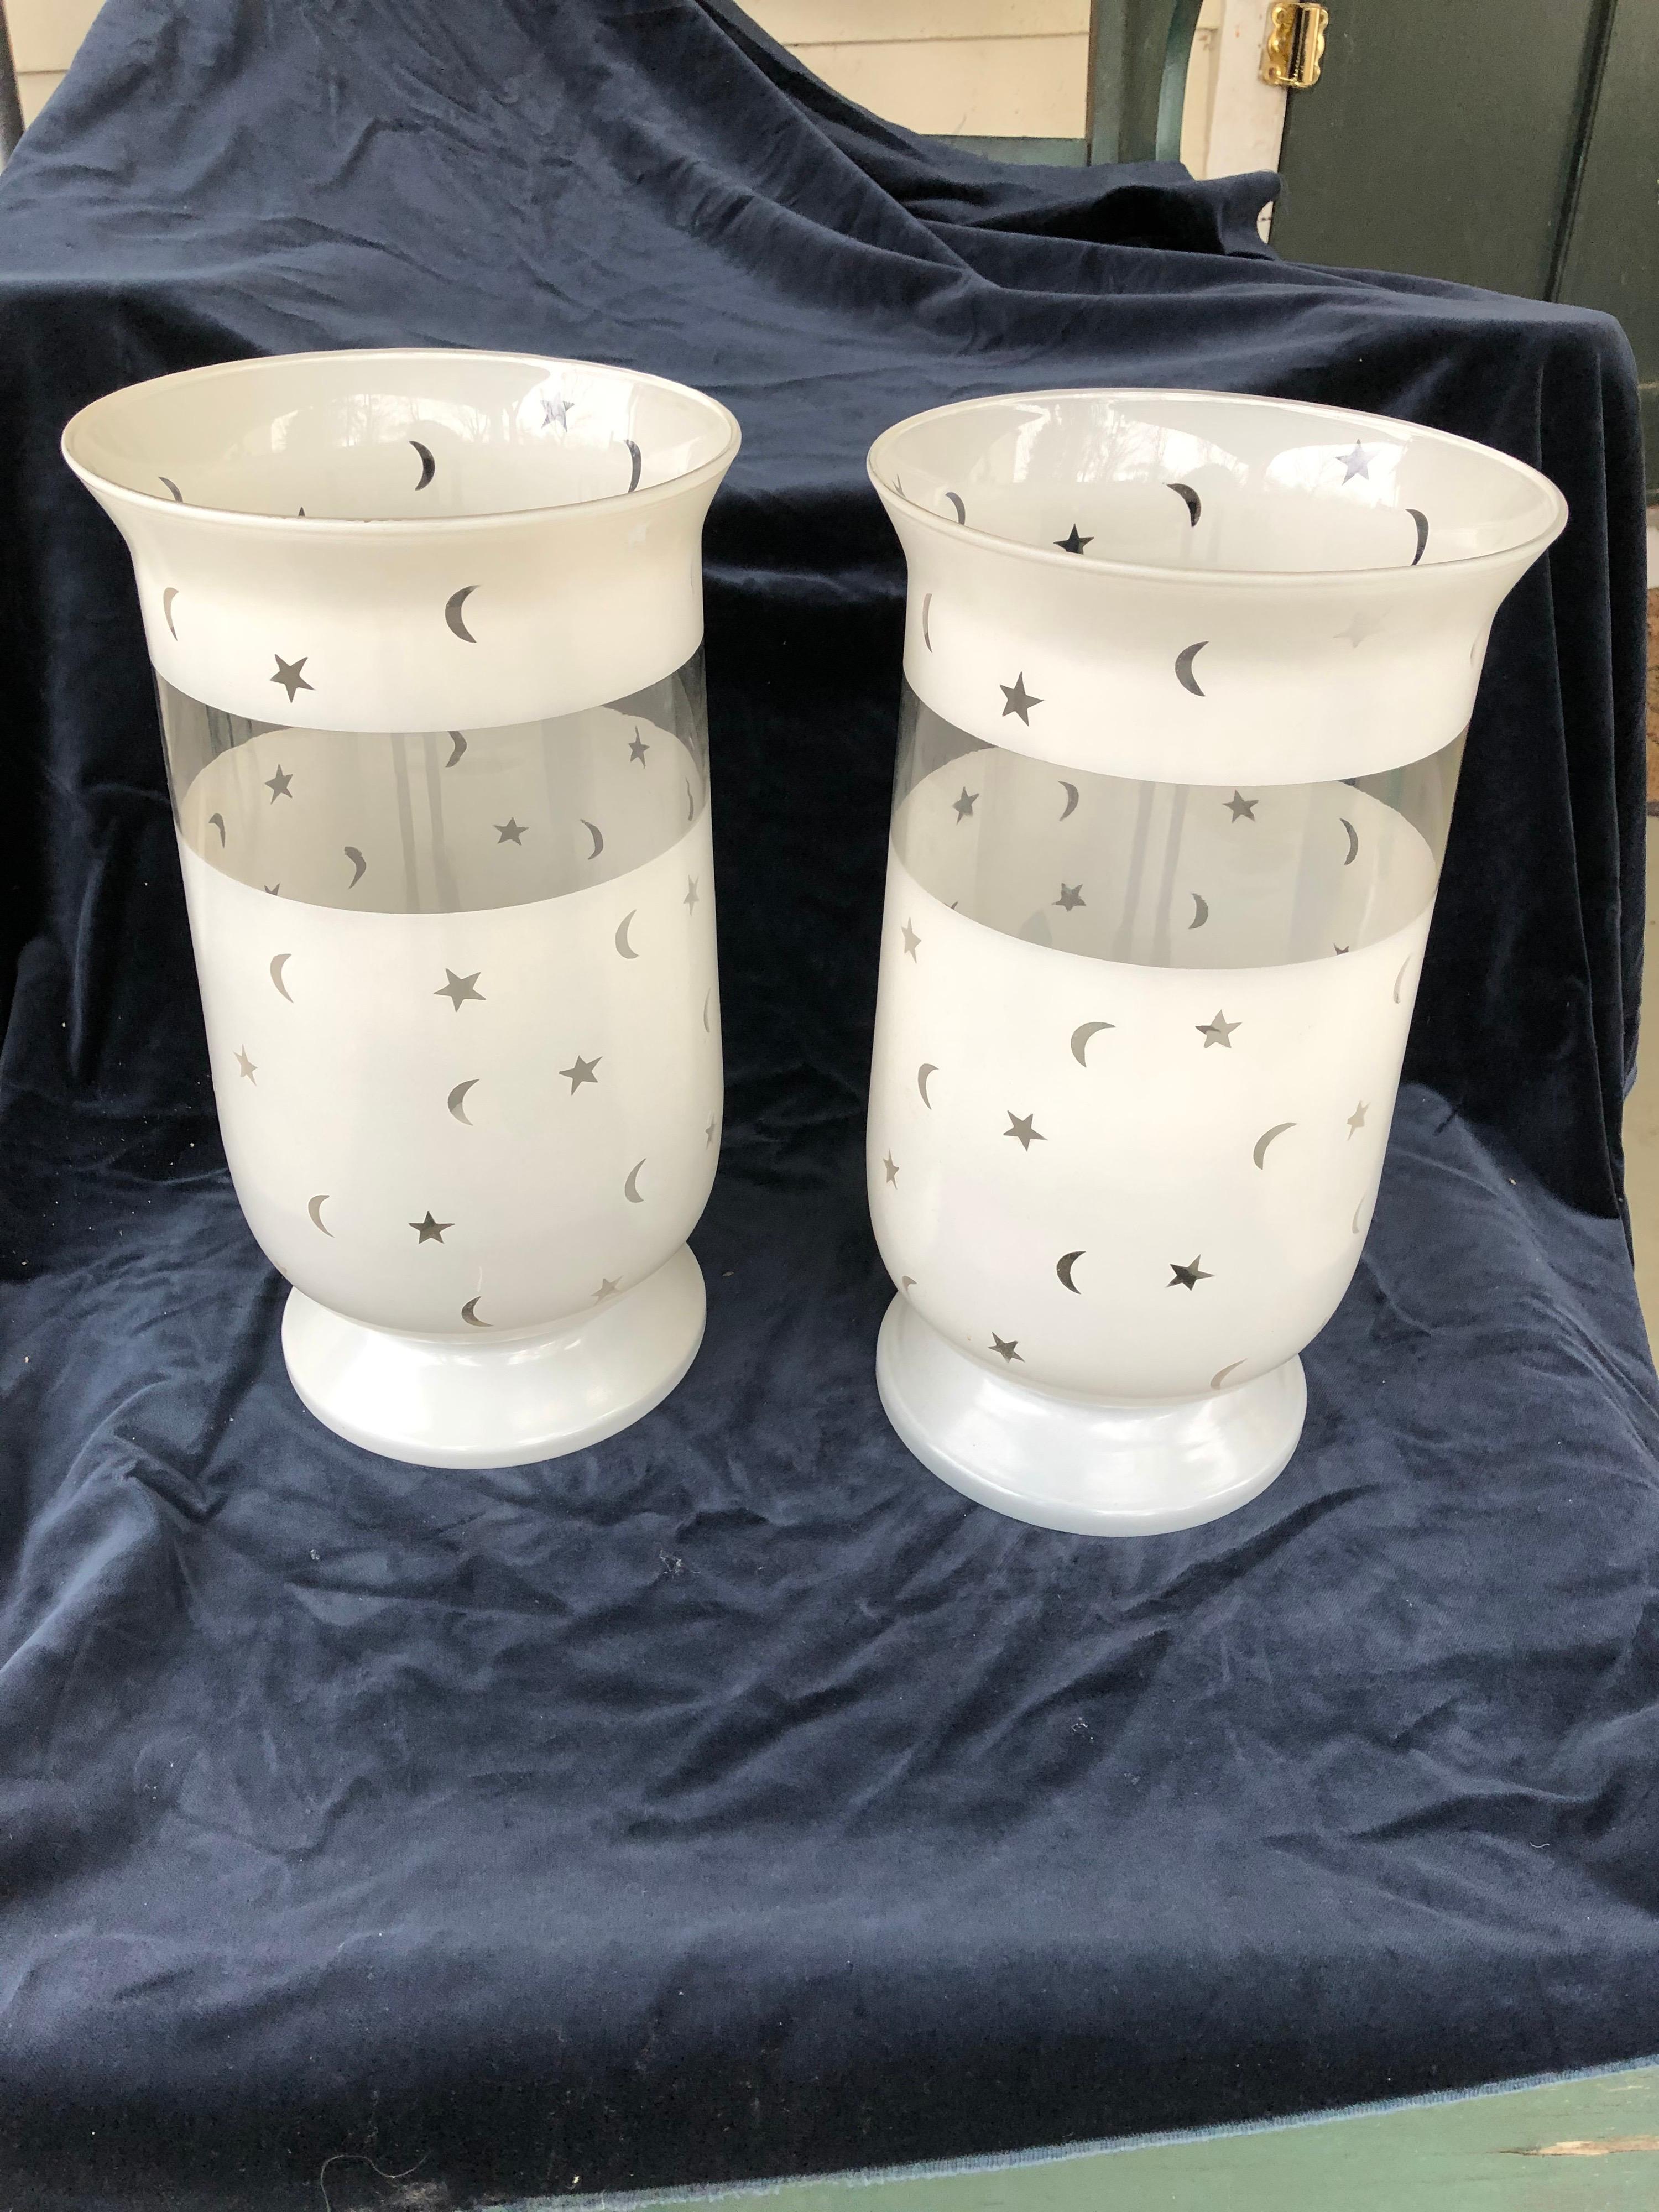 Handsome large scale pair of frosted glass hurricane shades with moon and stars decoration. Modern. Minor wear and a few abrasions otherwise in excellent shape. Solid bottoms to shades so a candle can be placed inside the shade.